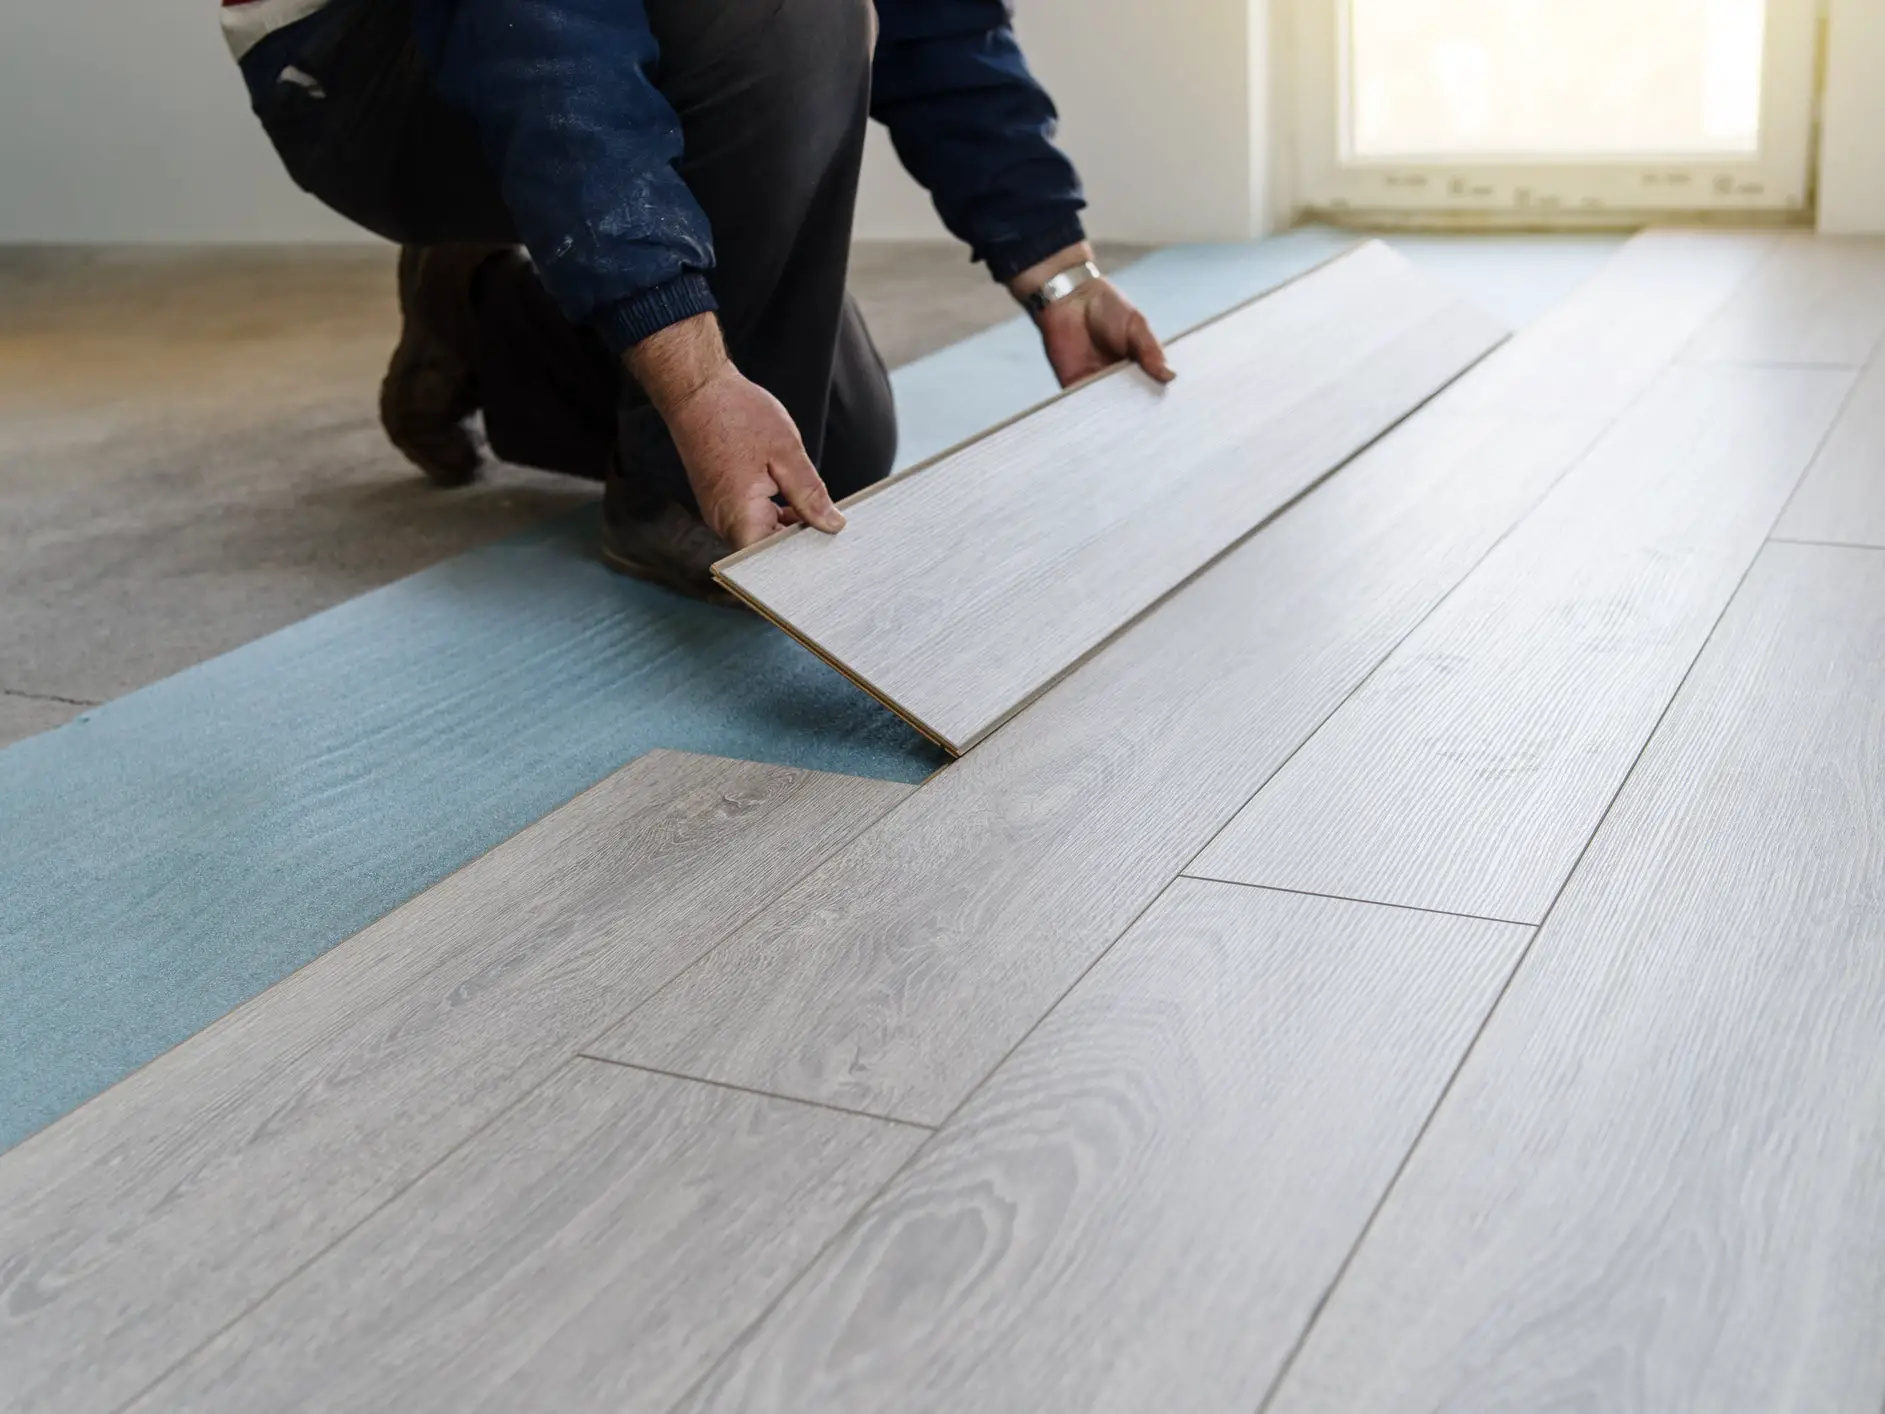 How To Install Temporary Flooring Over, Can I Lay Laminate Flooring Over Carpet Pad